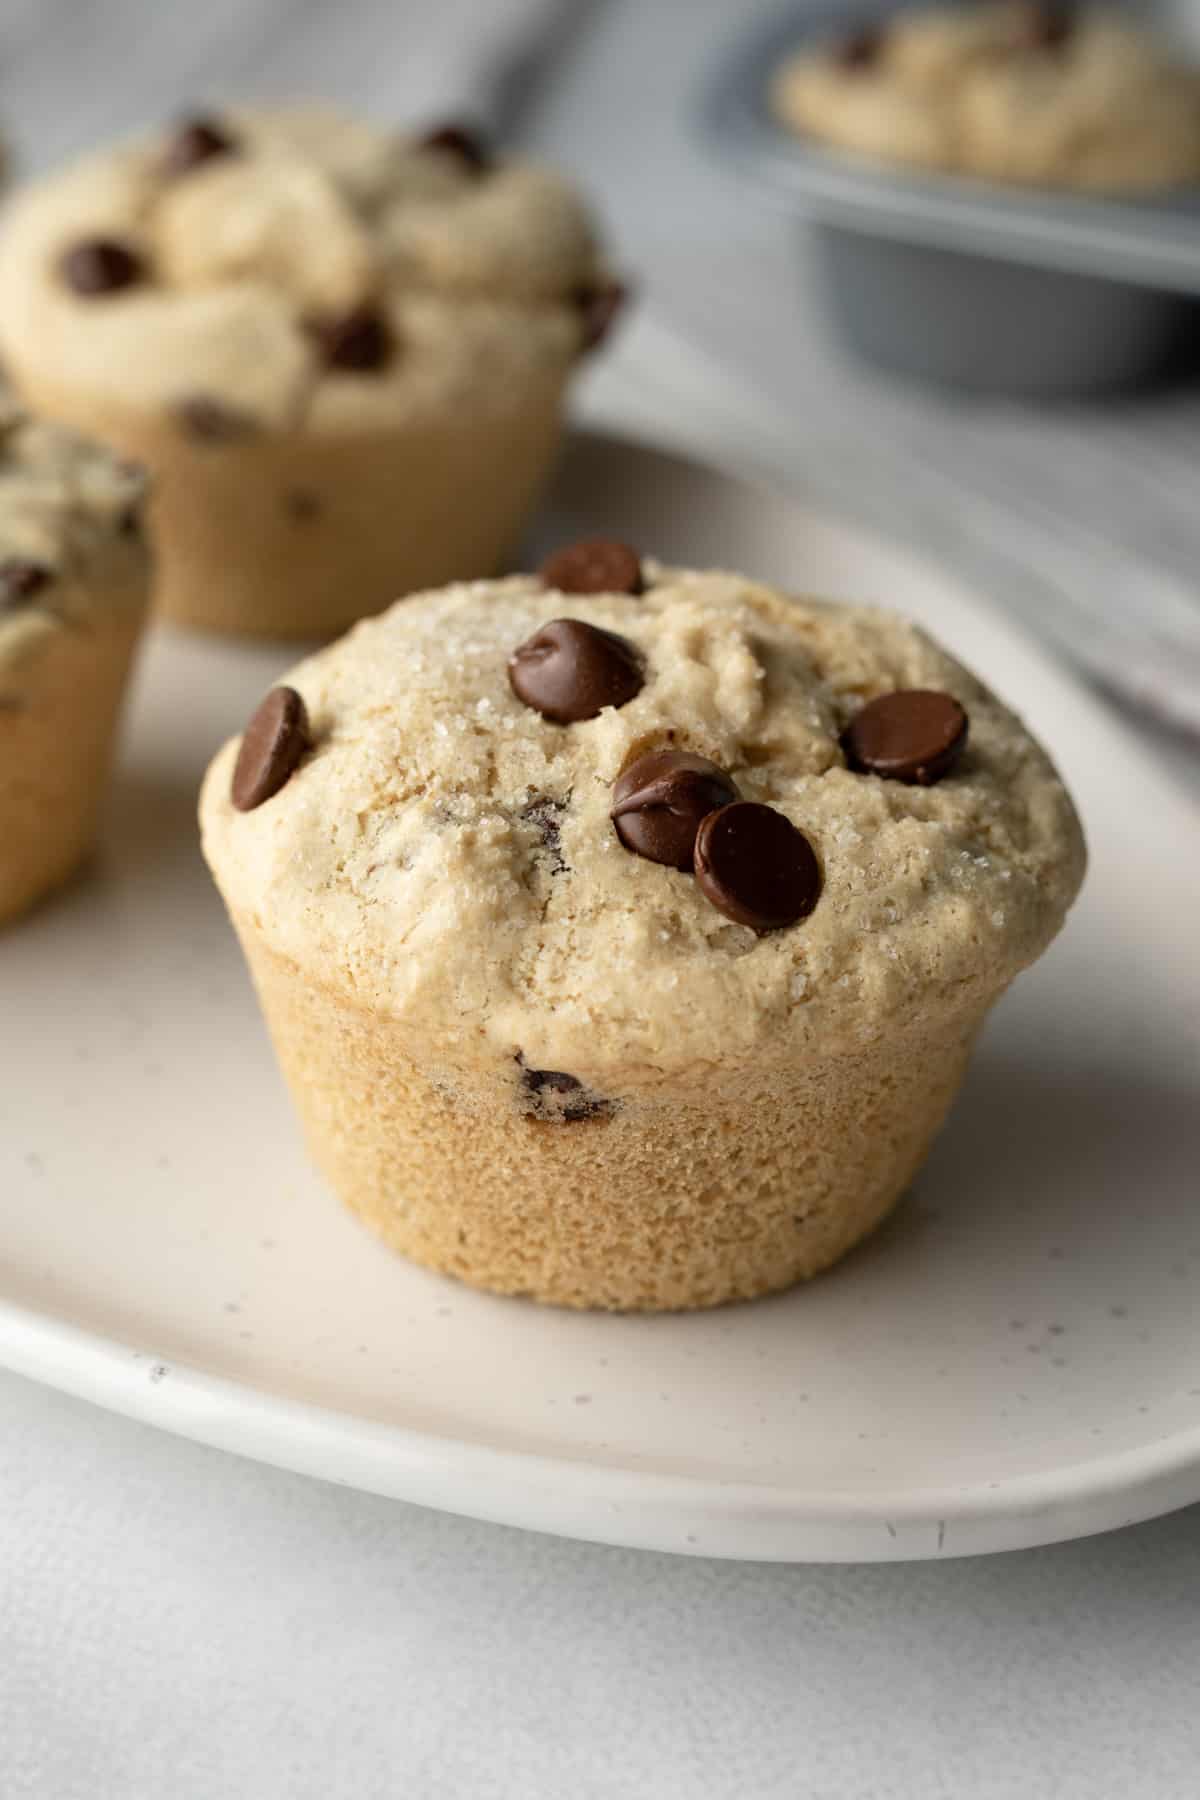 close up of muffins made with GF flour and chocolate chips instead of blueberries.